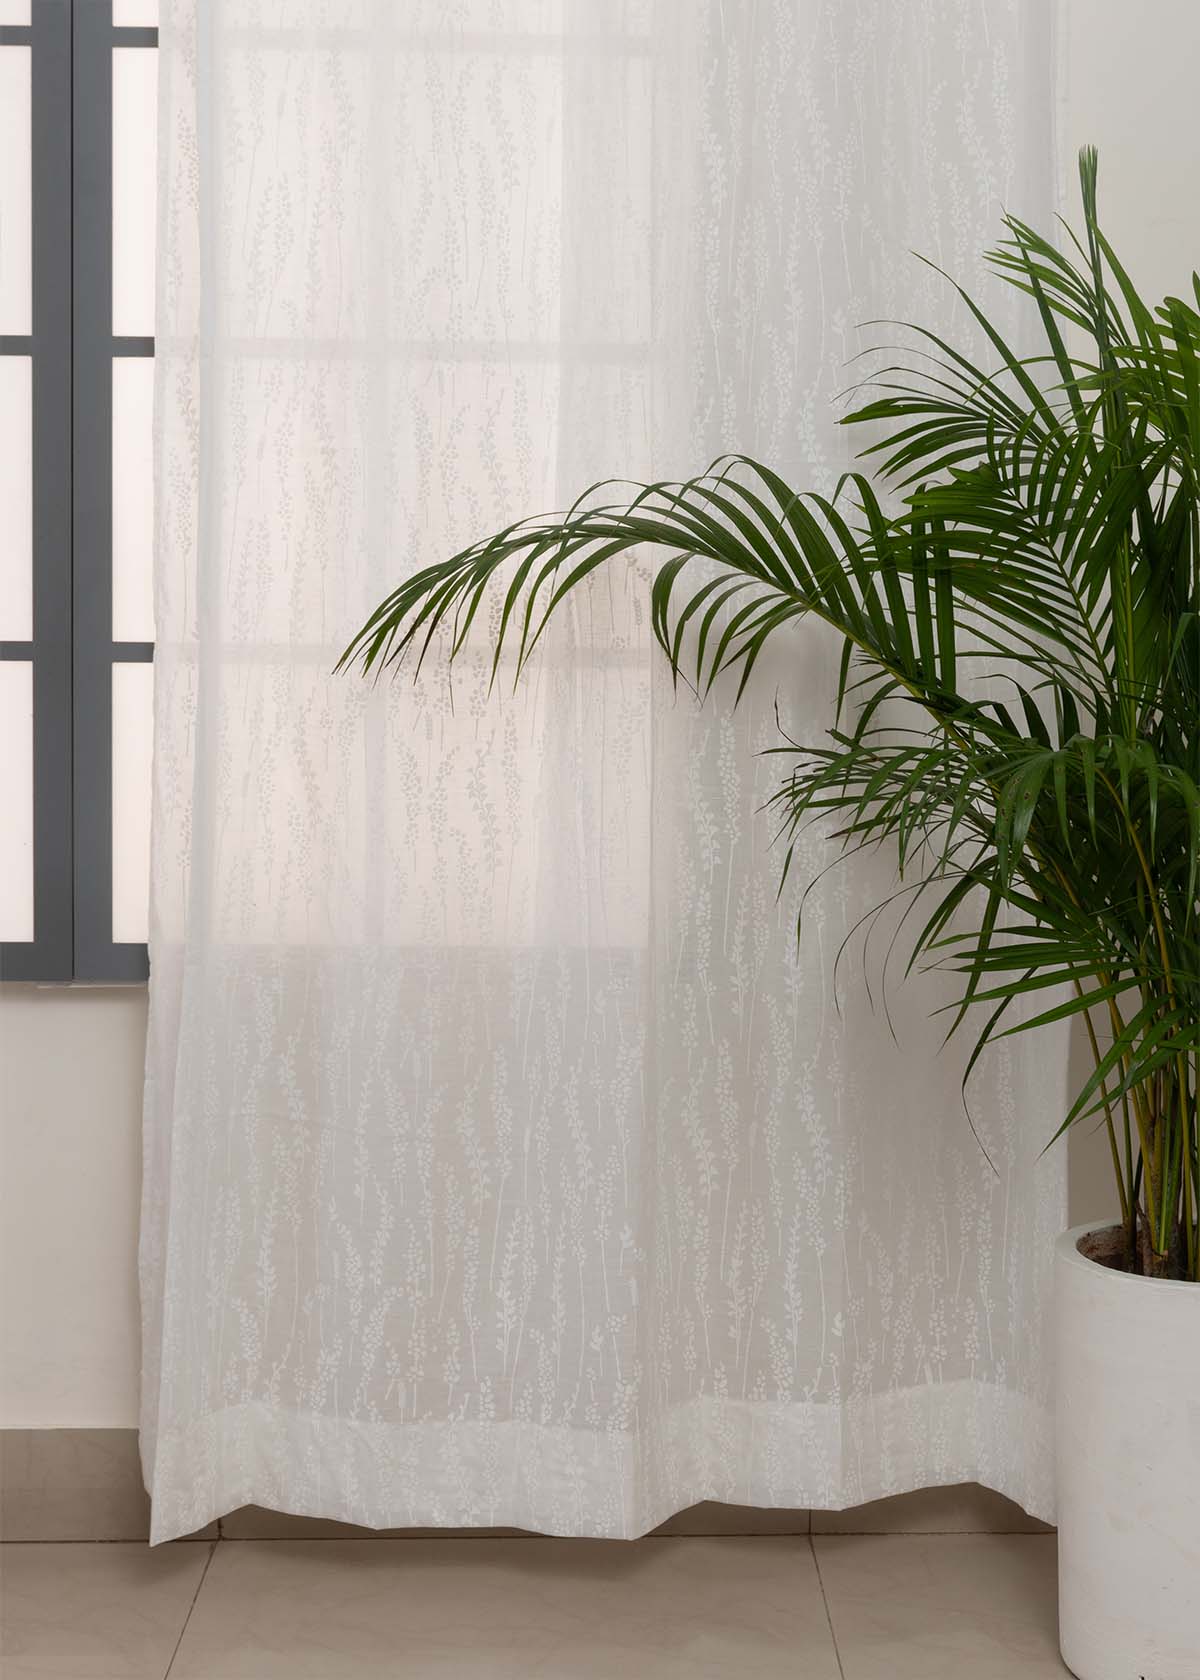 Grass fileds  100% cotton sheer floral curtain for living room -  Light filtering - White - Pack of 1